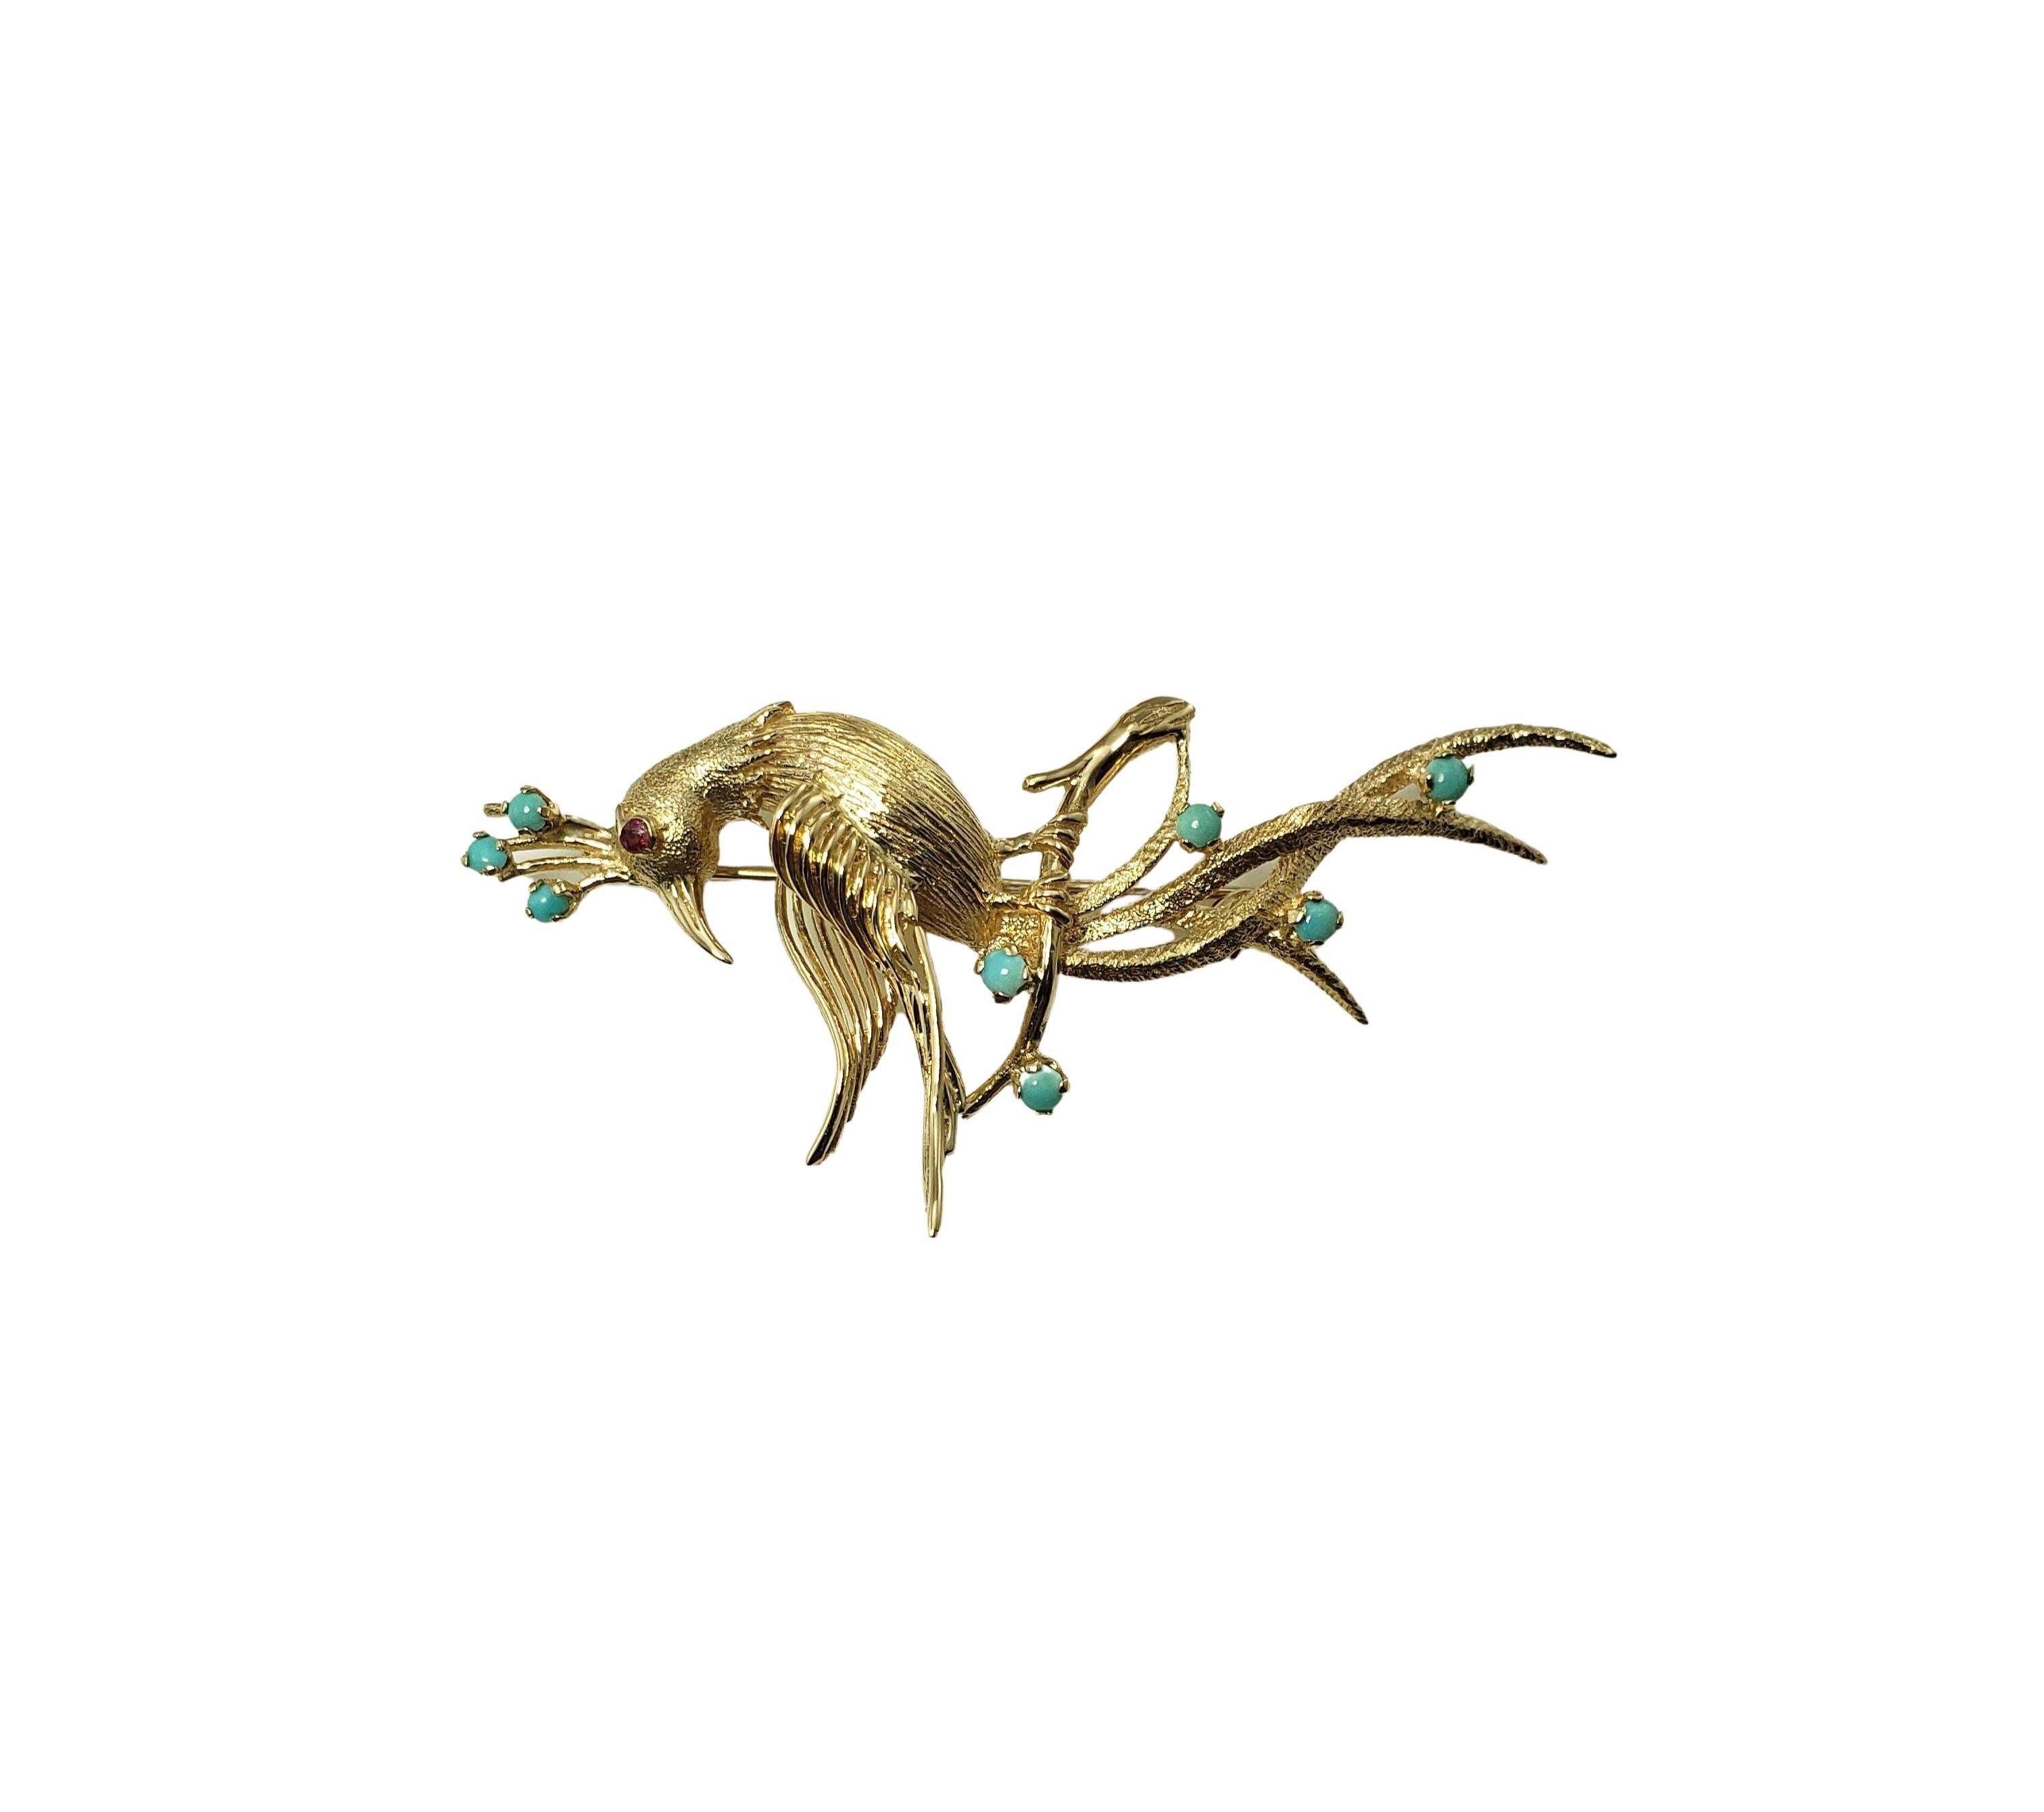 14 Karat Yellow Gold and Turquoise Peacock Brooch/Pin-

This lovely brooch features a majestic peacock accented with eight turquoise stone and two red faceted stone eyes set in beautifully detailed 14K yellow gold.

Size:  62 mm x 30 mm

Weight: 